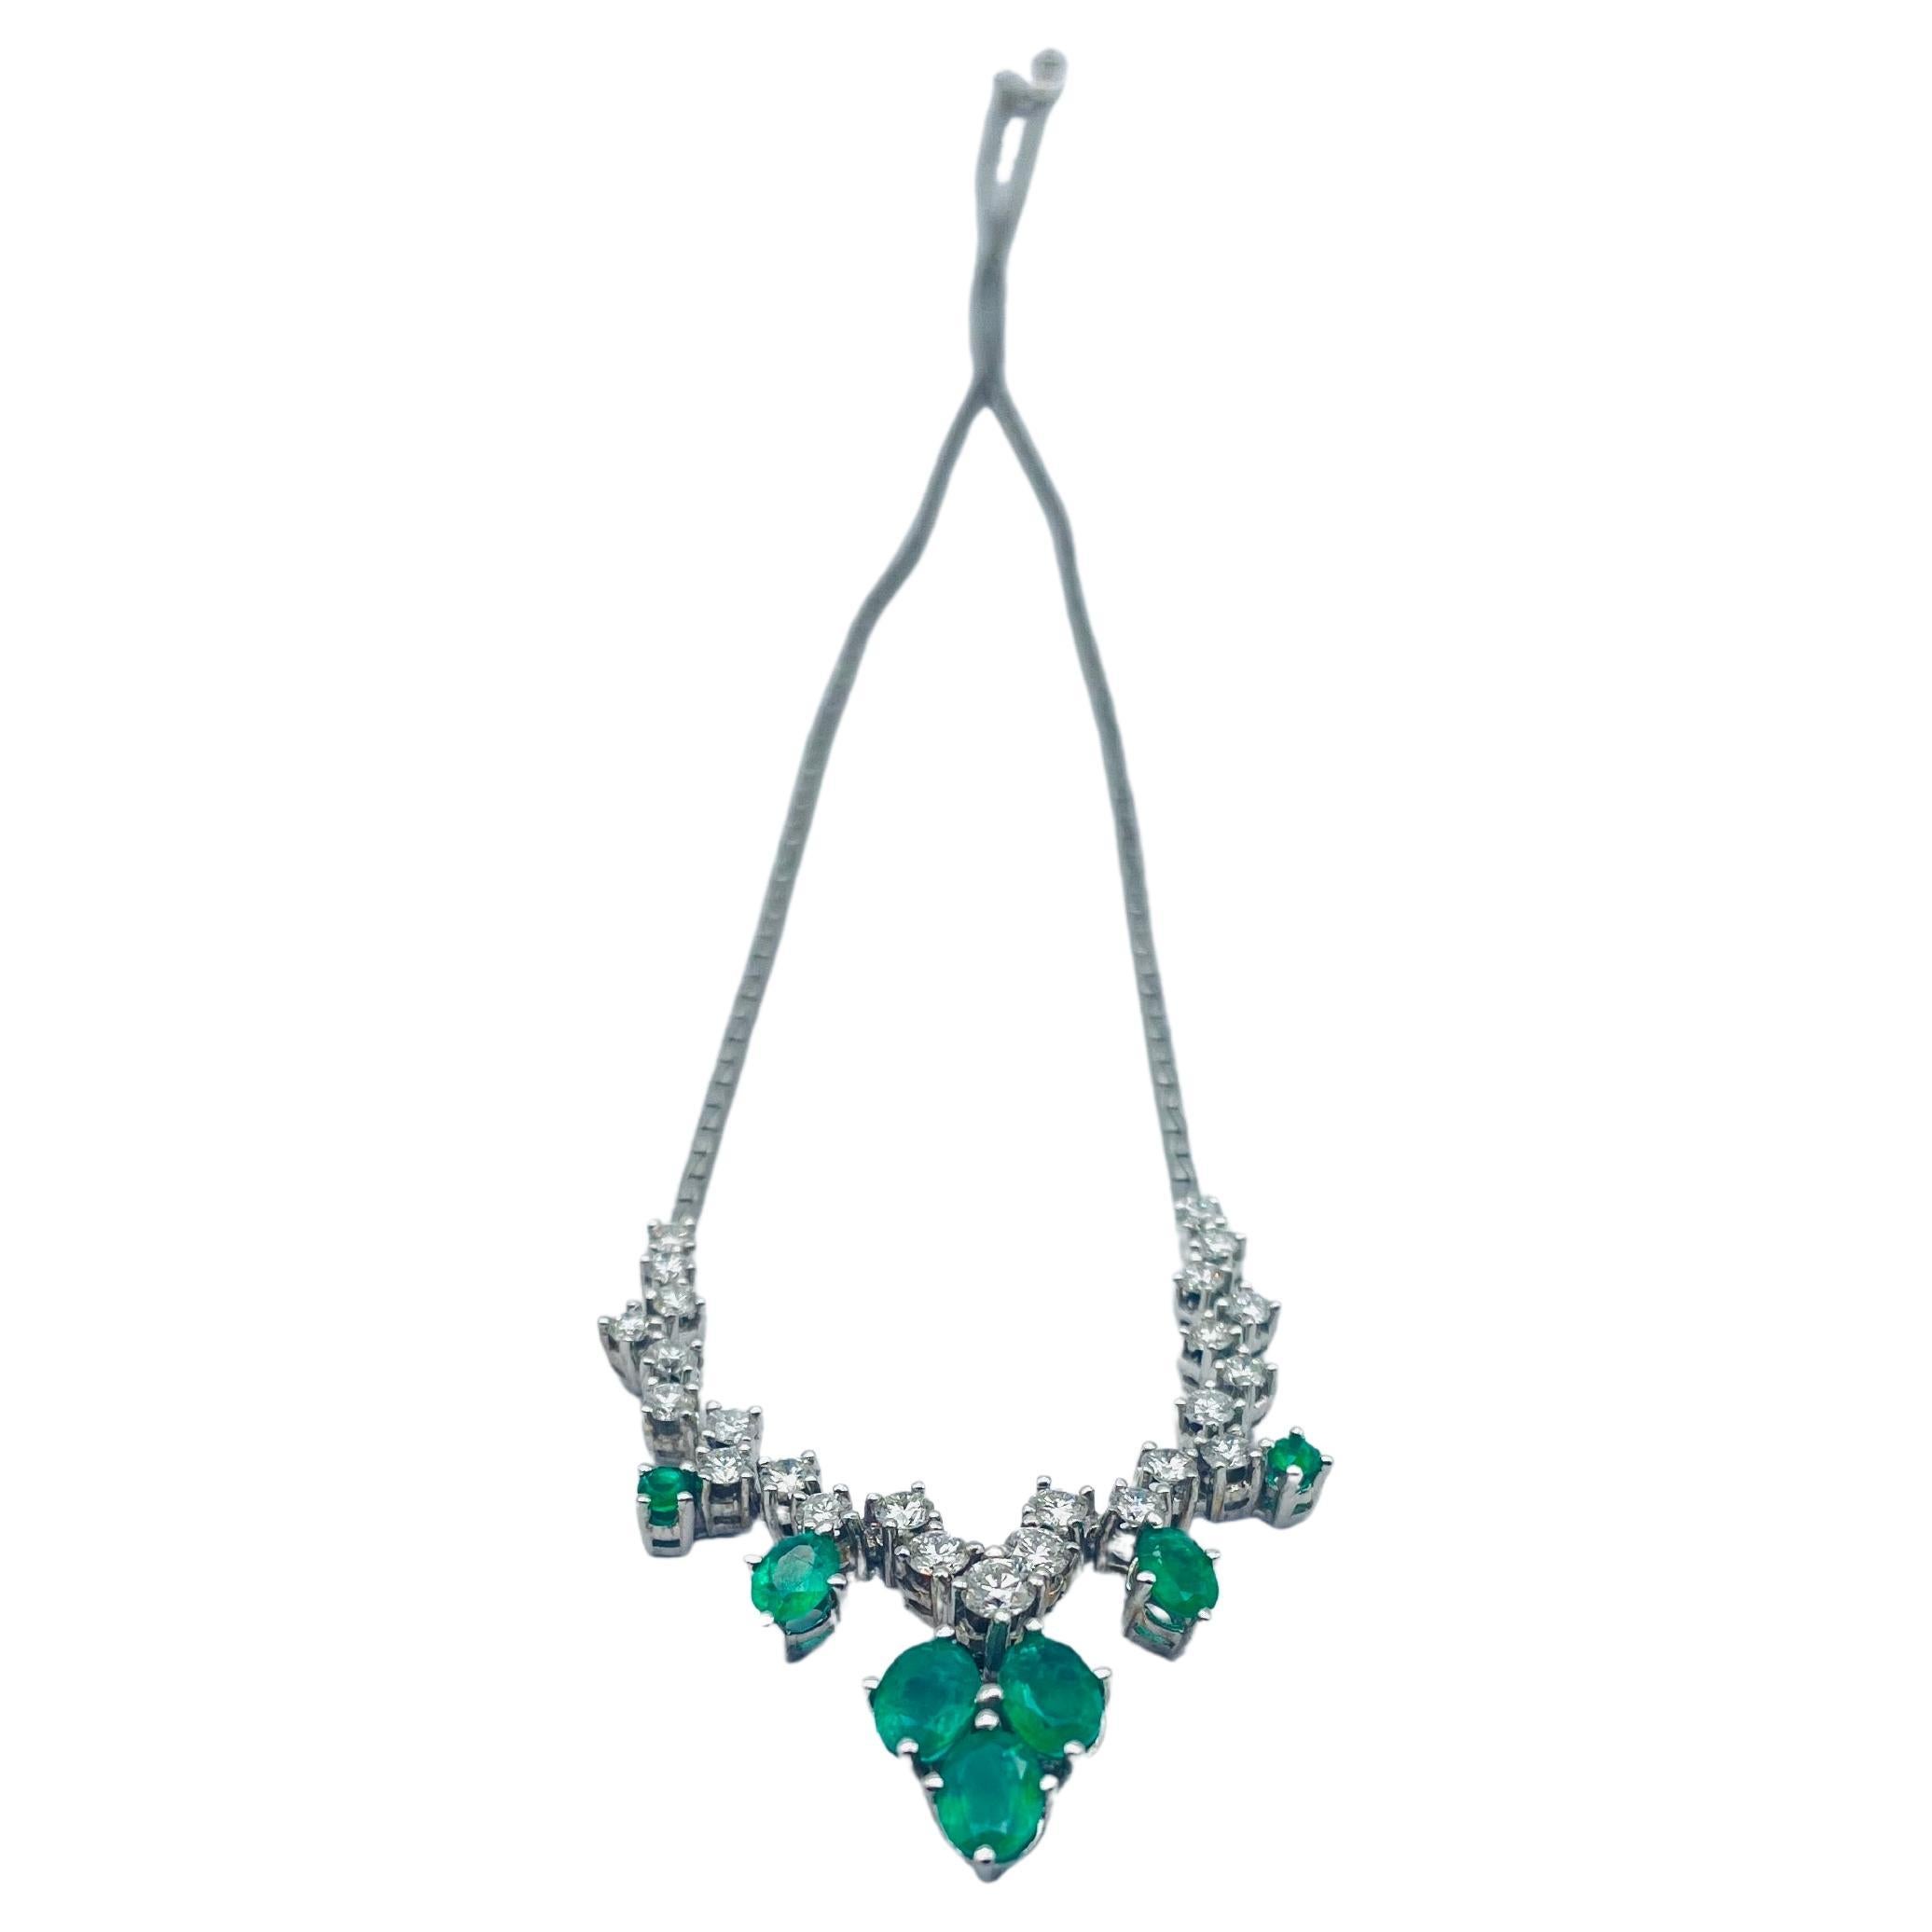 Exquisite 18k White Gold Necklace emeralds and diamonds 1